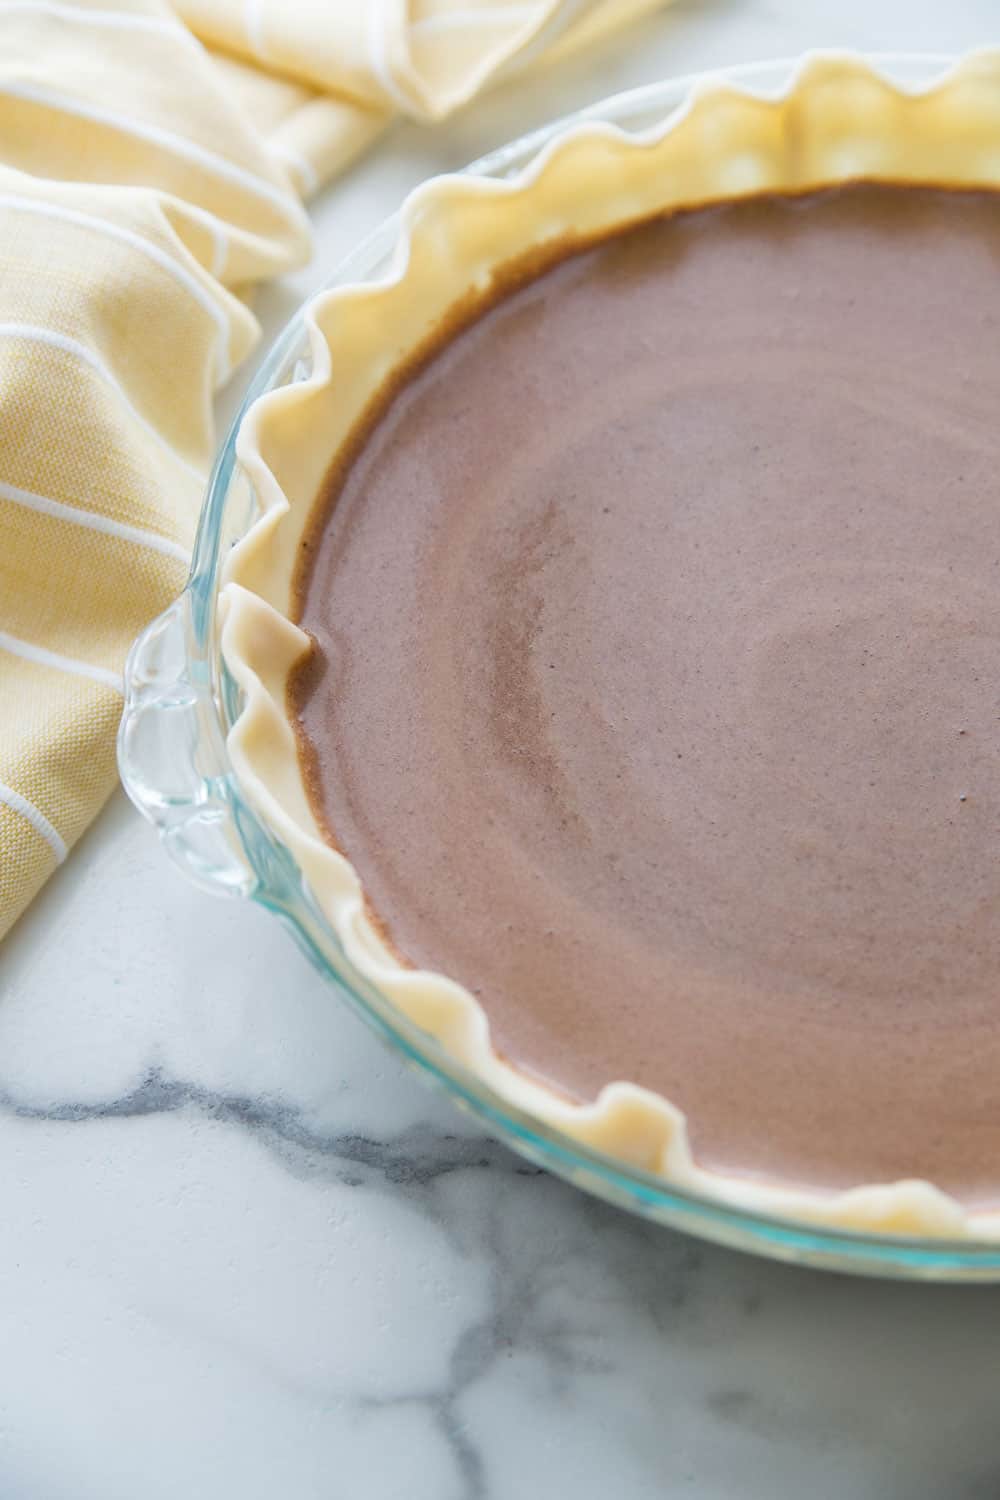 Chocolate Chess Pie batter in an uncooked pie crust and in a clear pie dish.